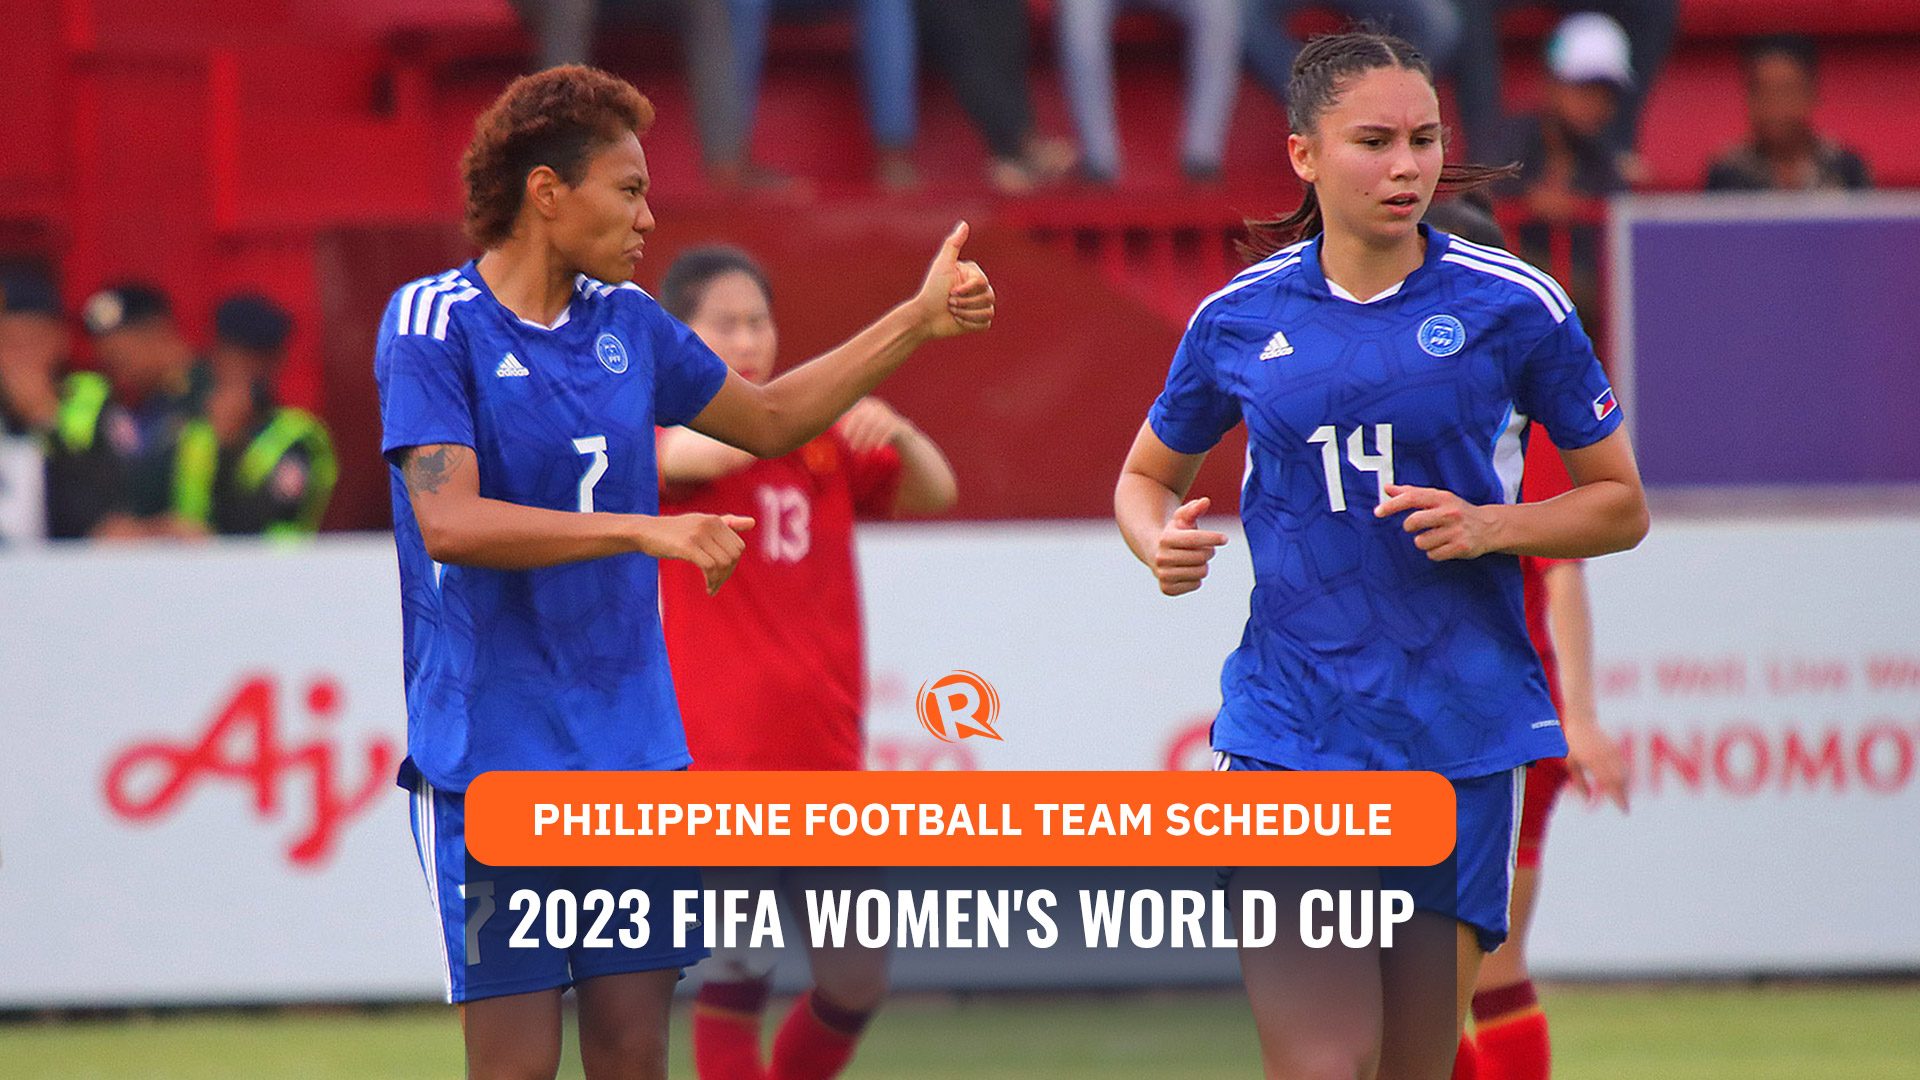 FIFA Womens World Cup Philippine team schedule, how to watch